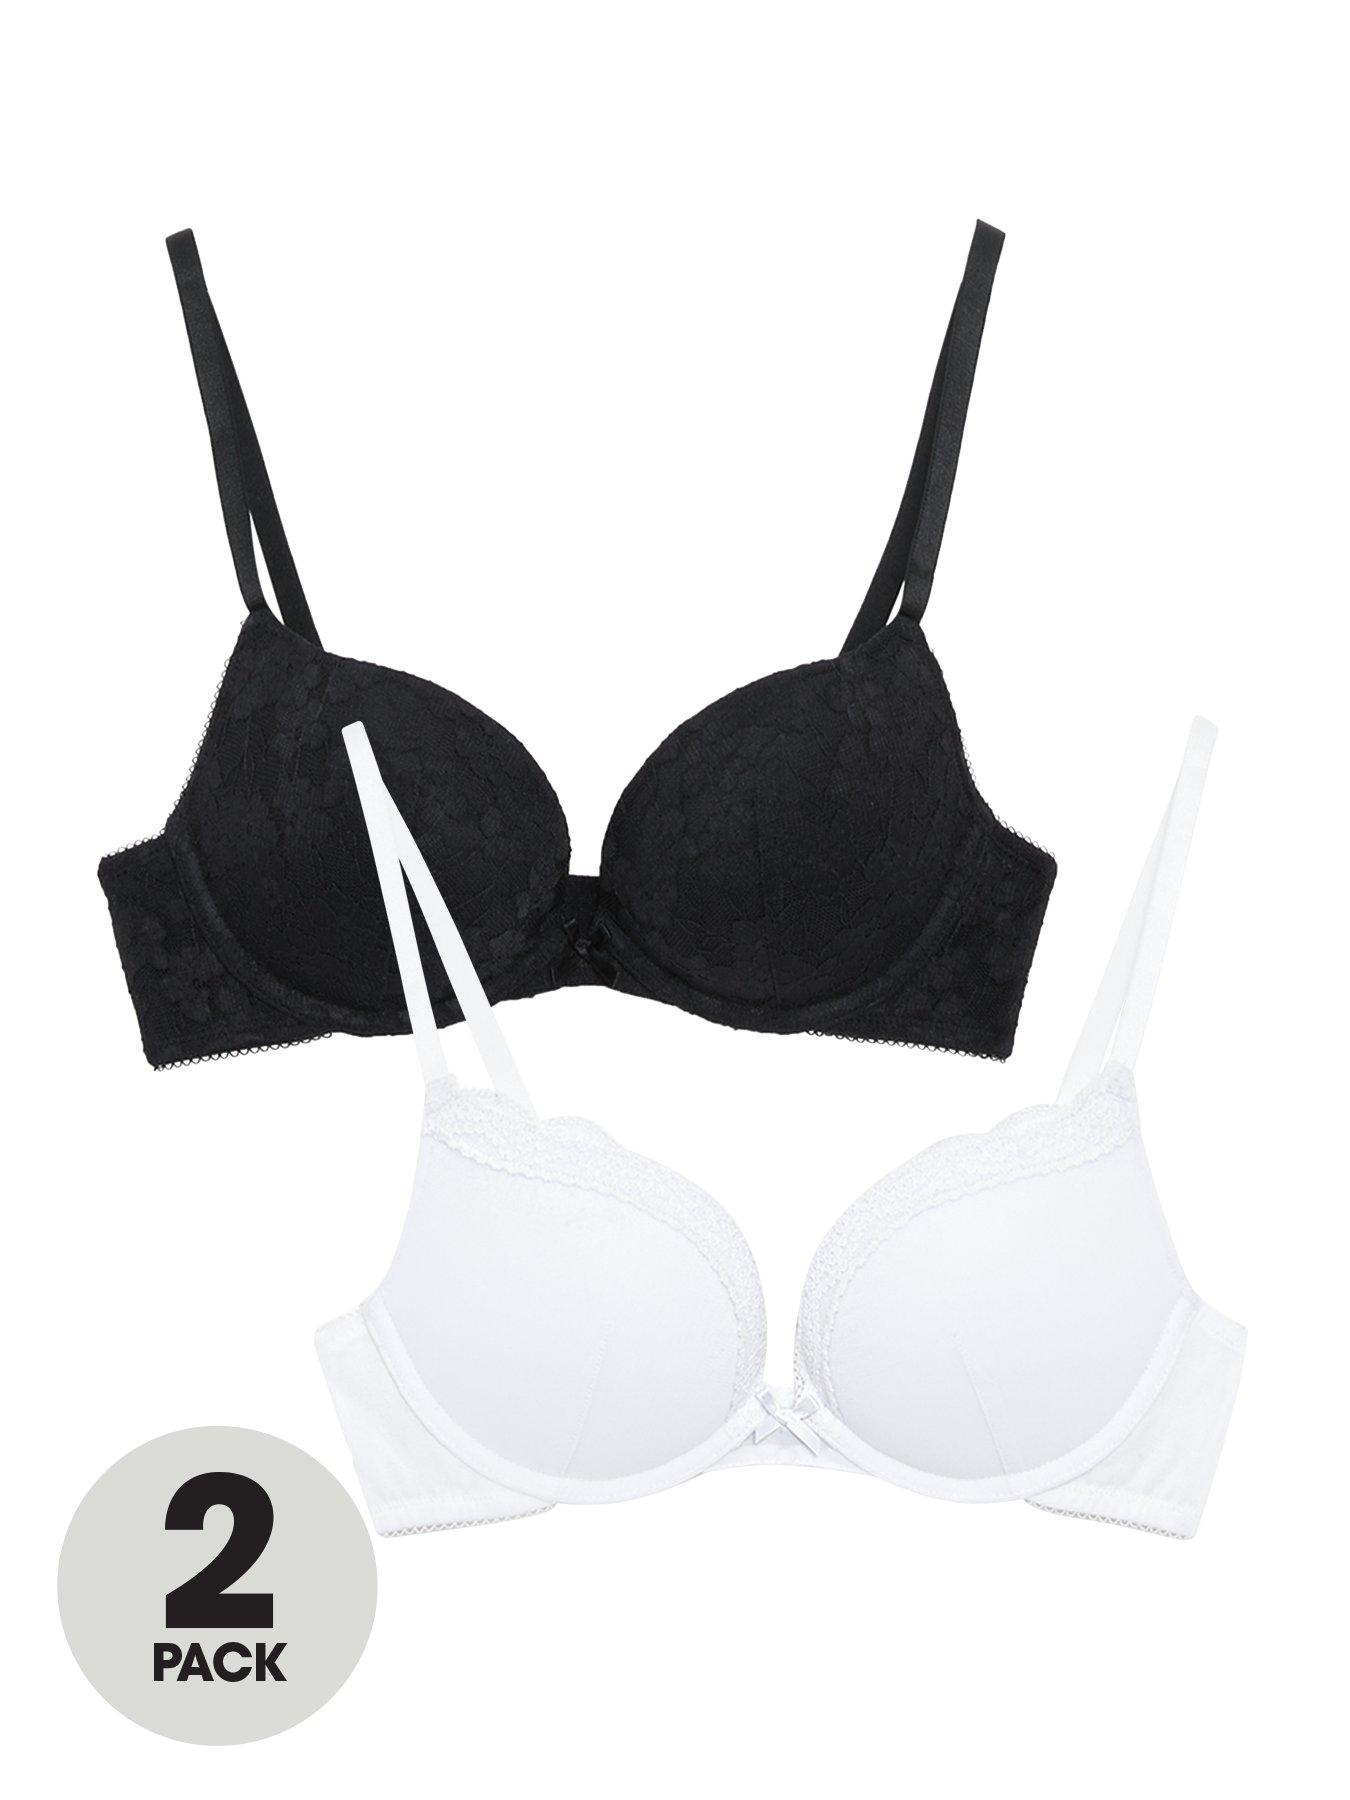 Track Summer Mesh Unlined Demi Bra - Orchid Cabinet - 34 - A at Skims